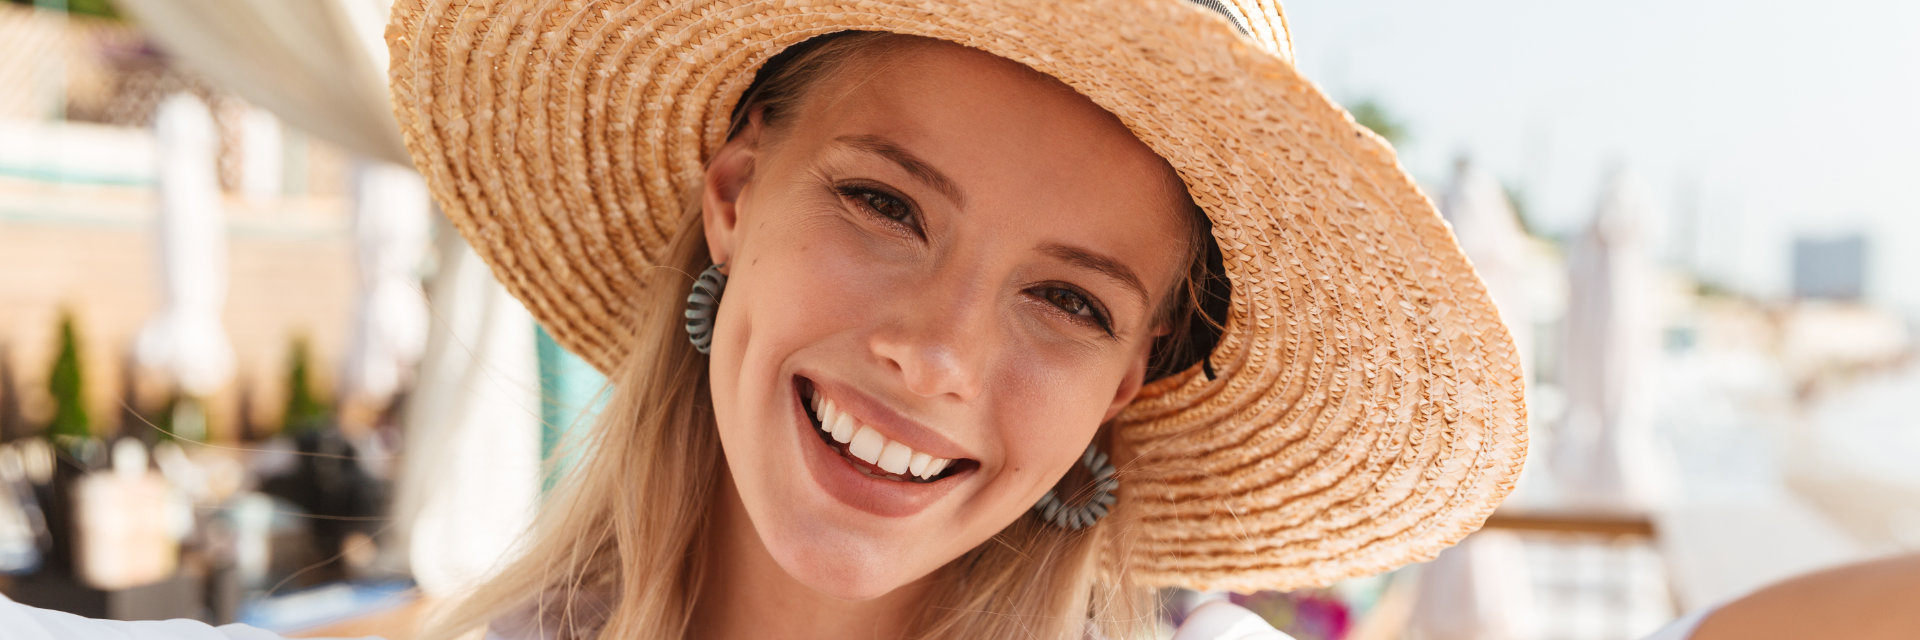 A beautiful young woman with a perfect smile wearing a straw hat.